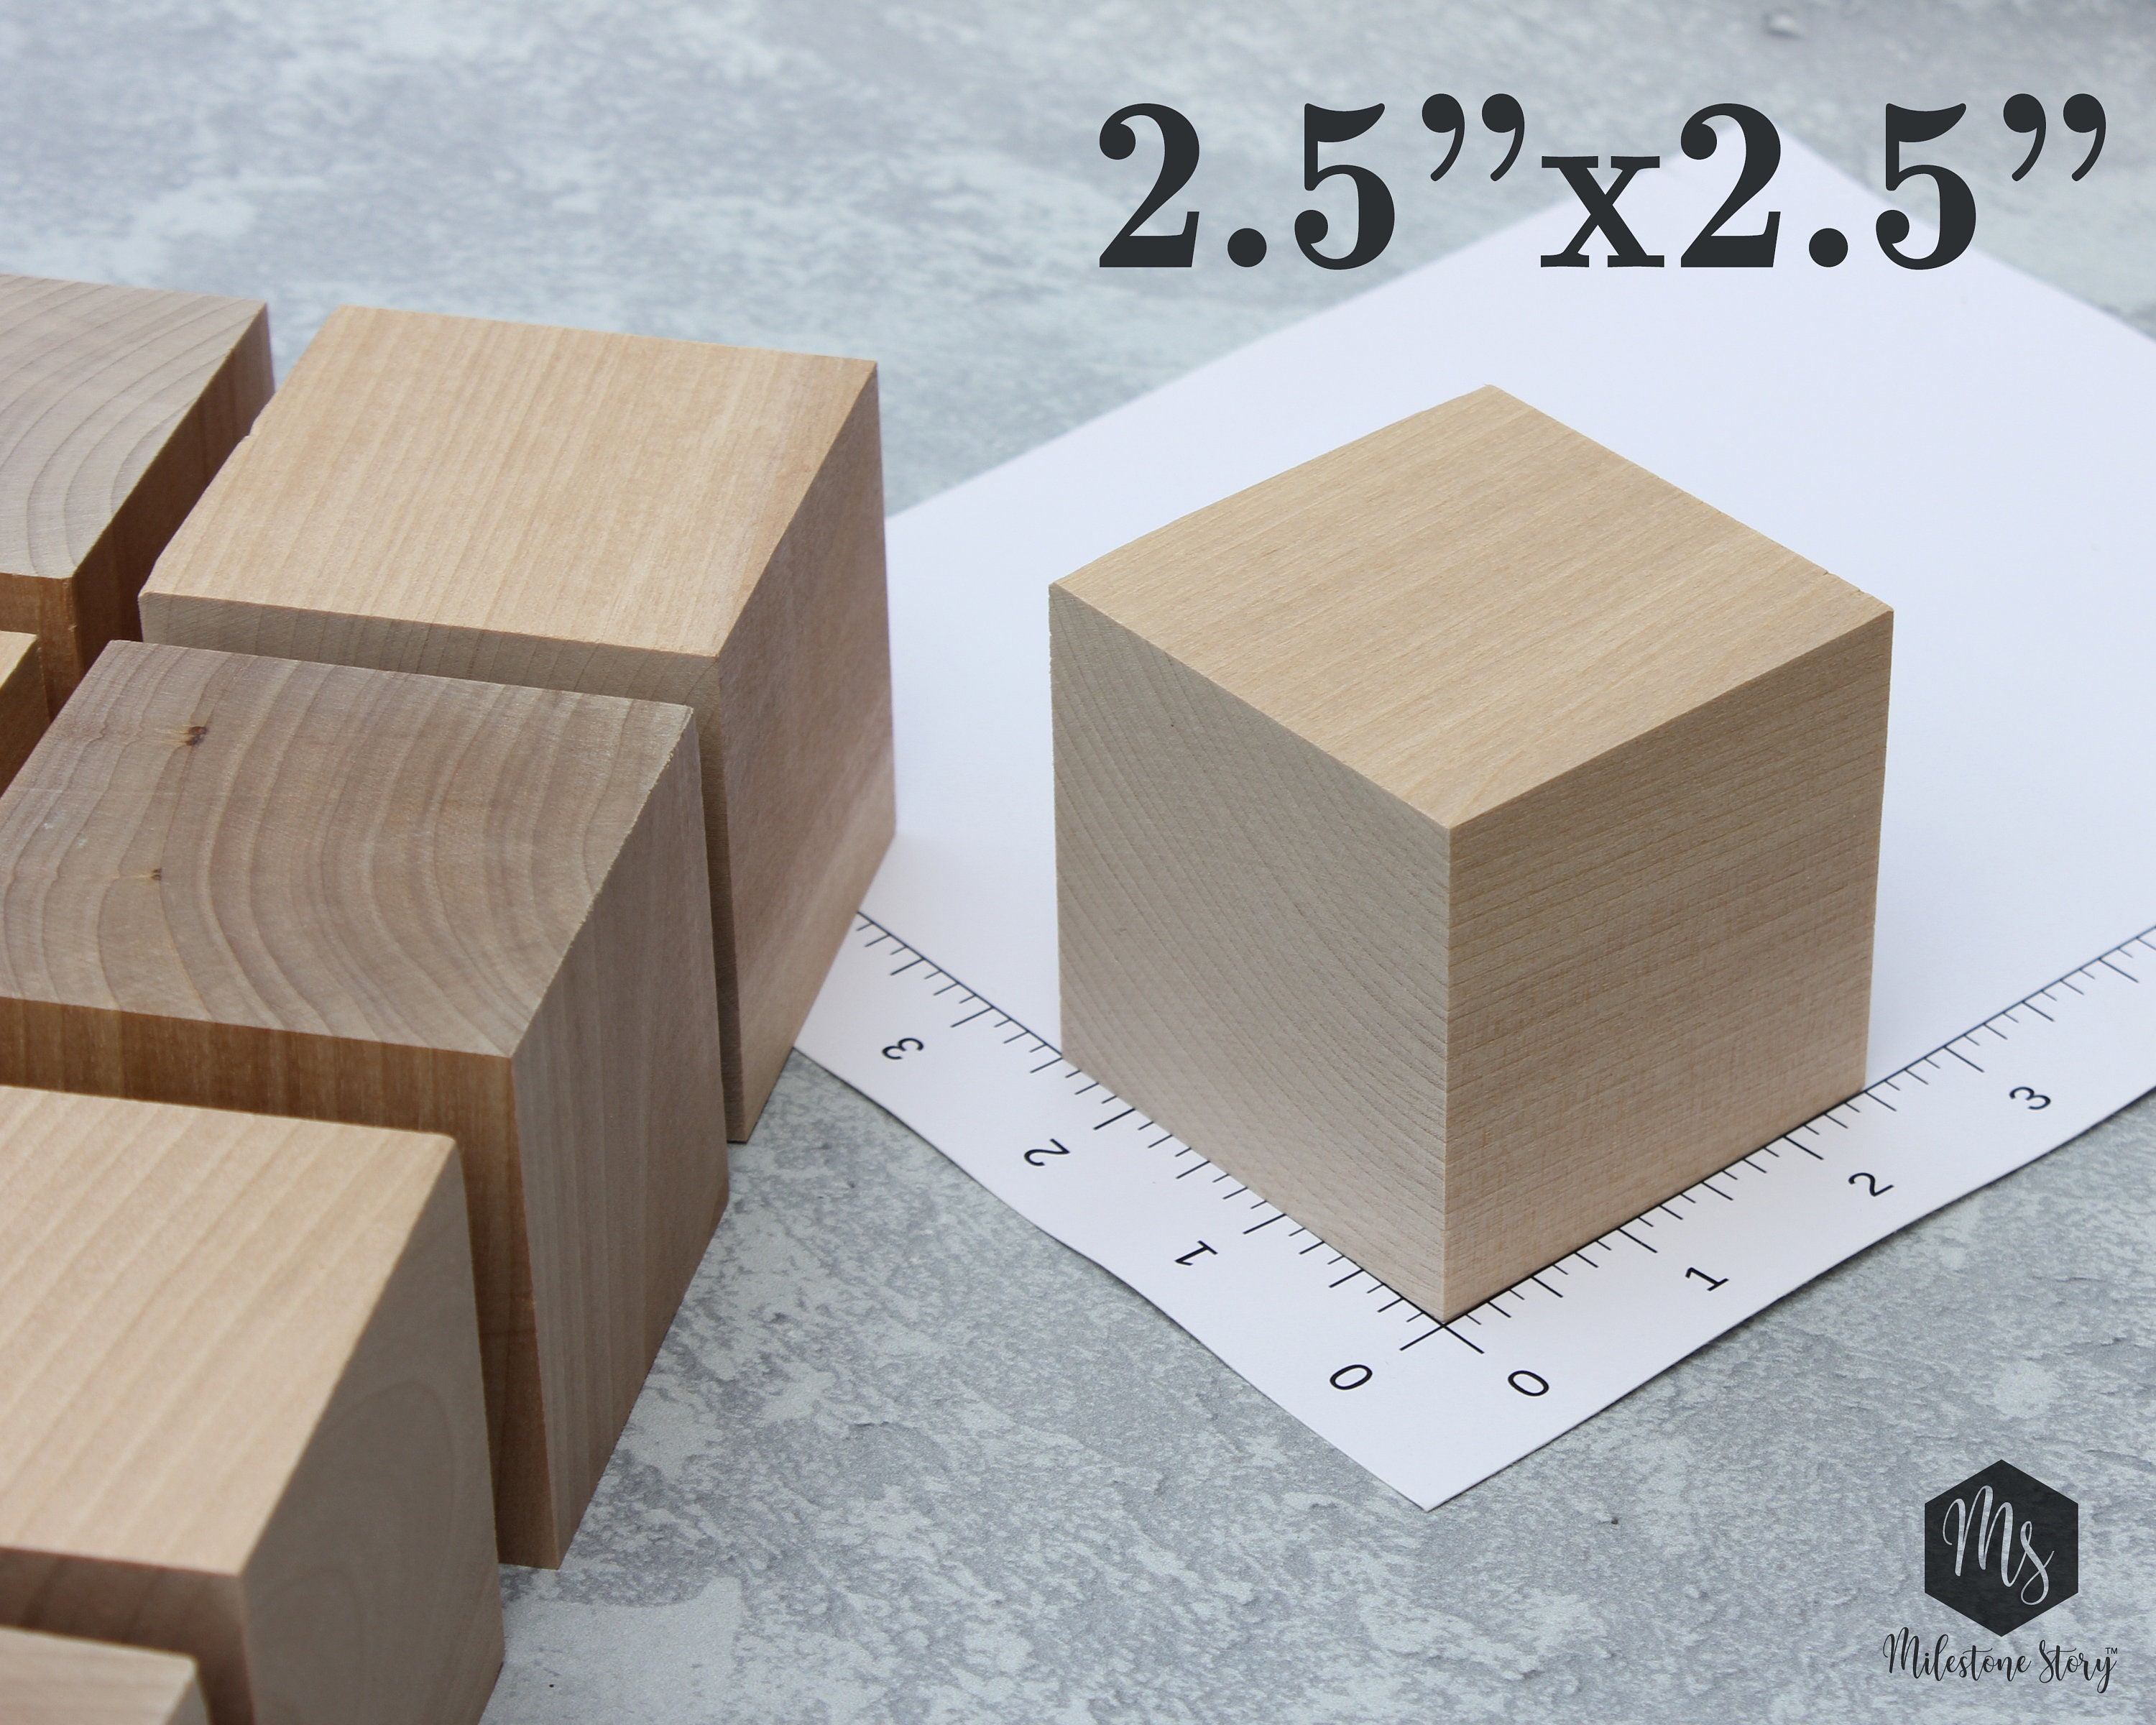 5 Pack Thick MDF Wood Blocks Unfinished Wooden Squares for Crafts 6x6x1 in